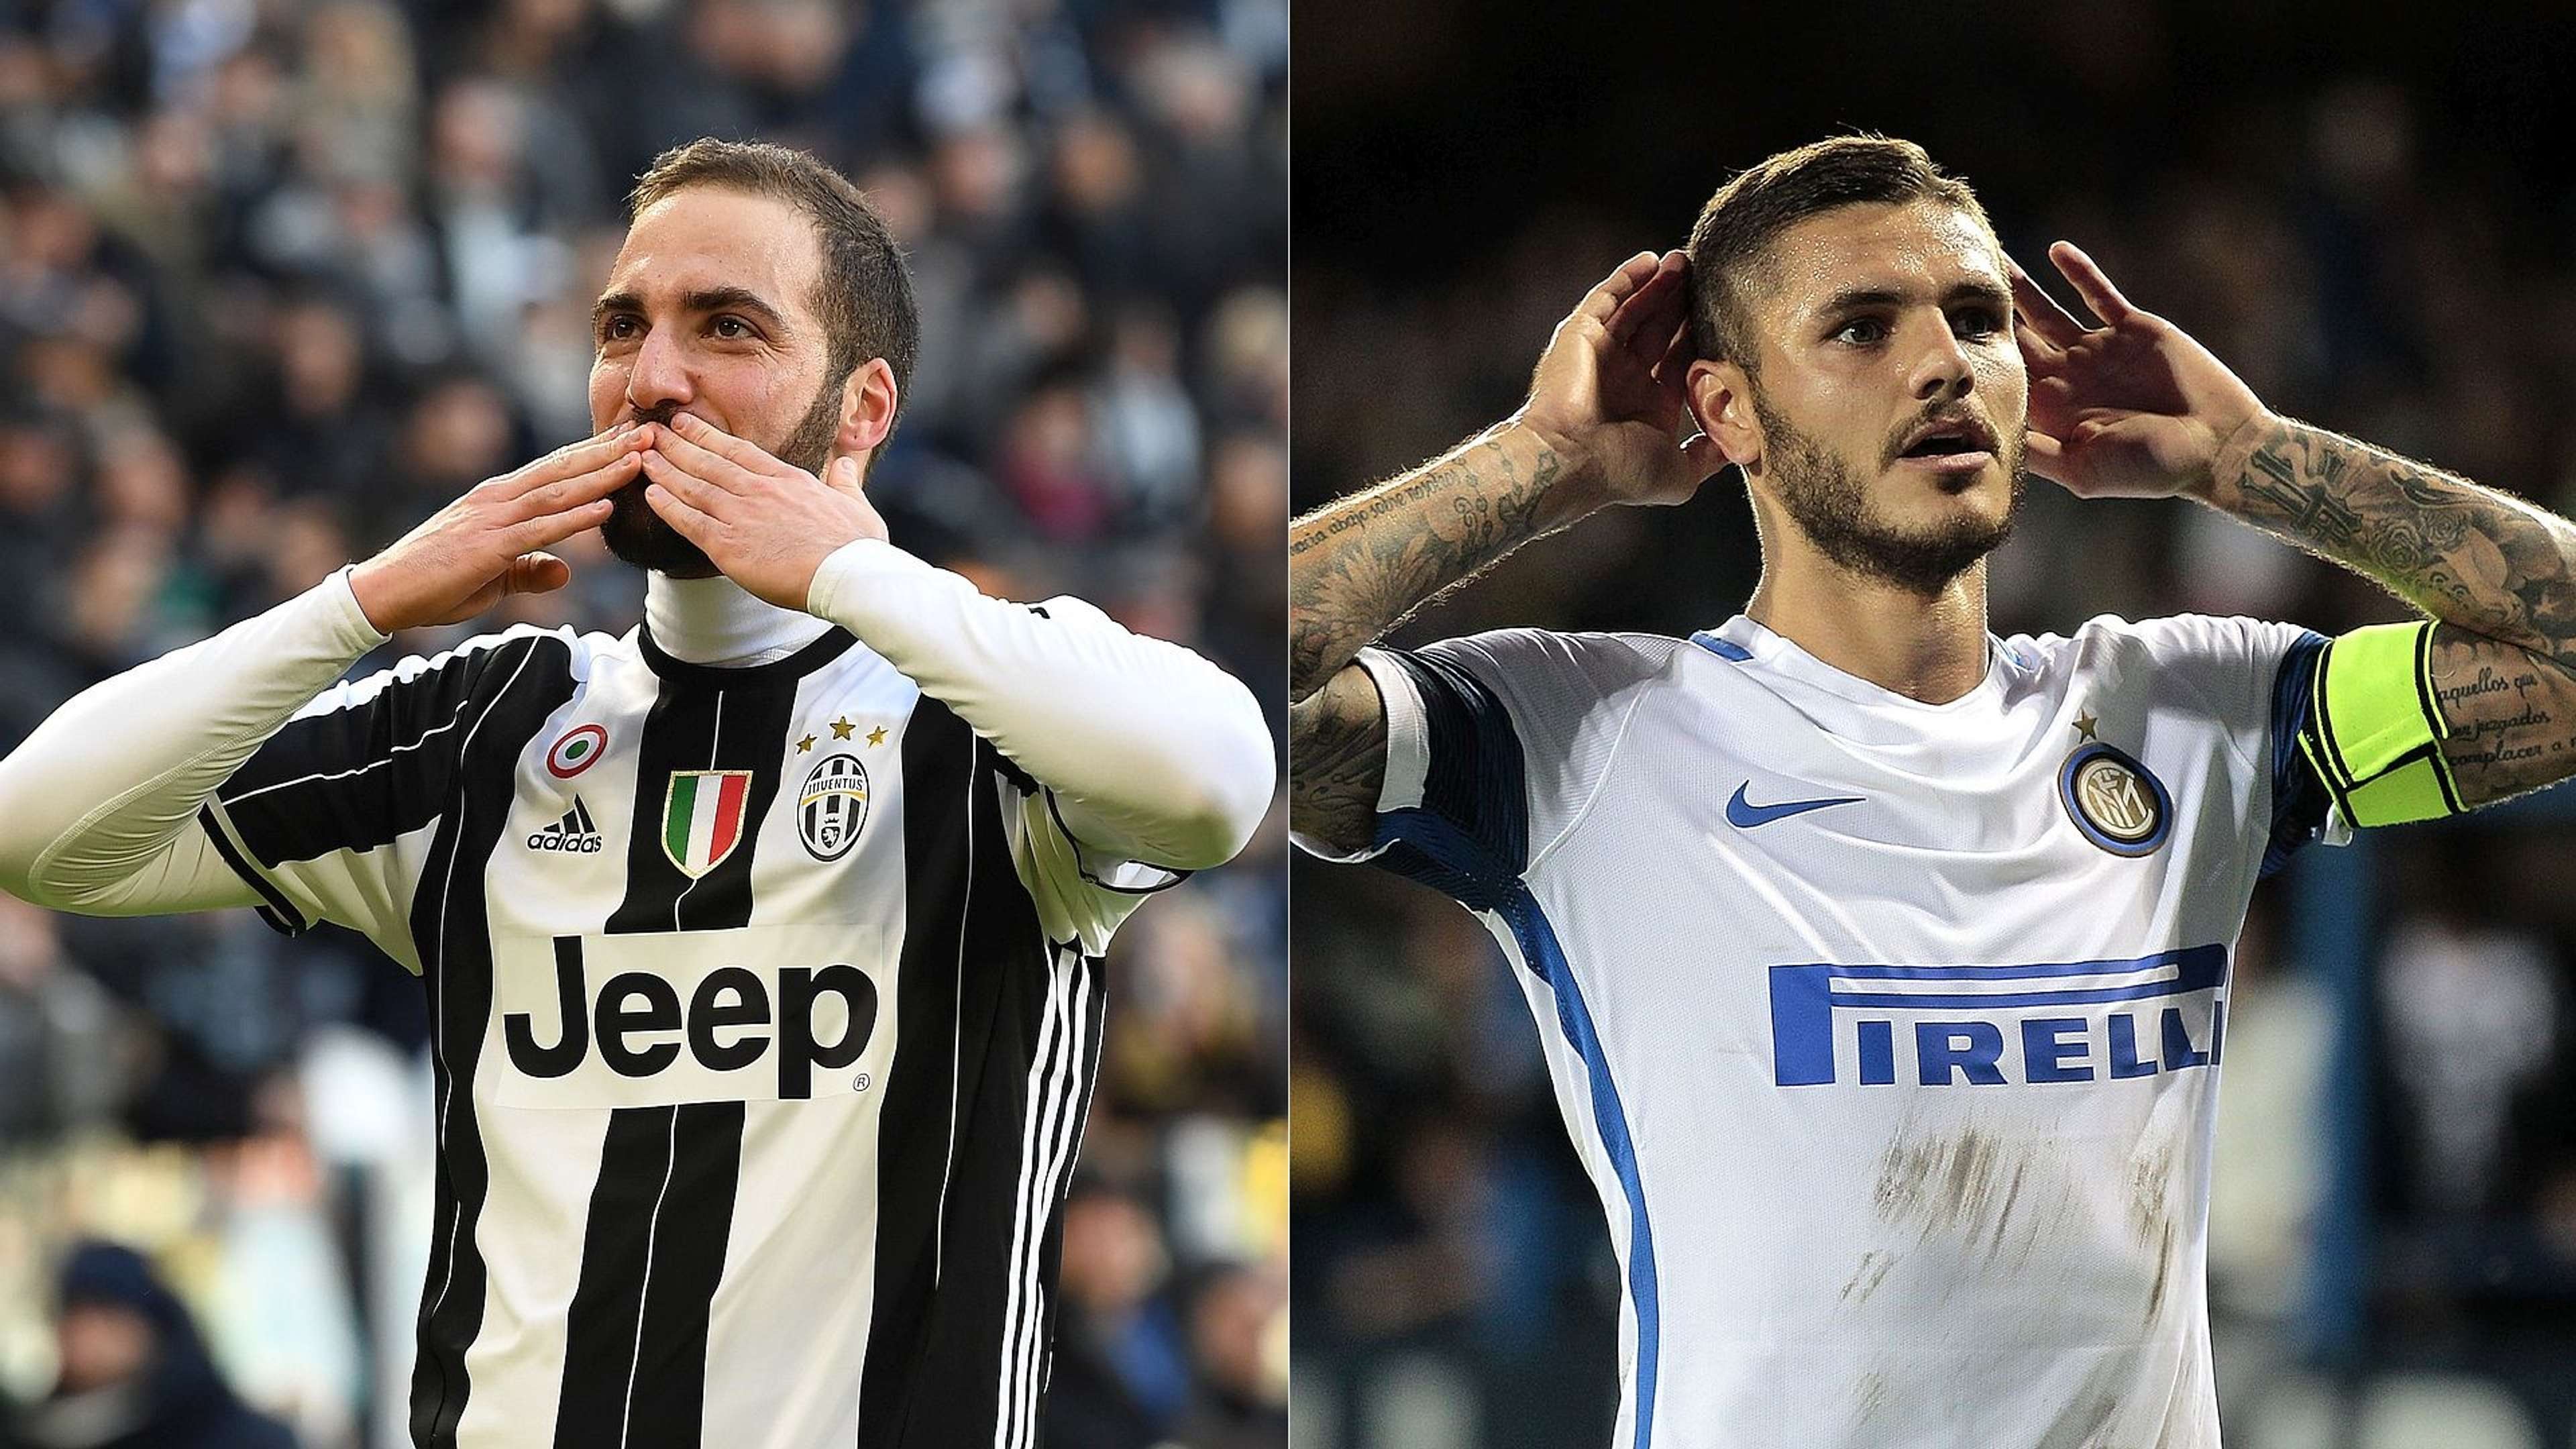 BETTING Germany Only Collage Higuain-Icardi